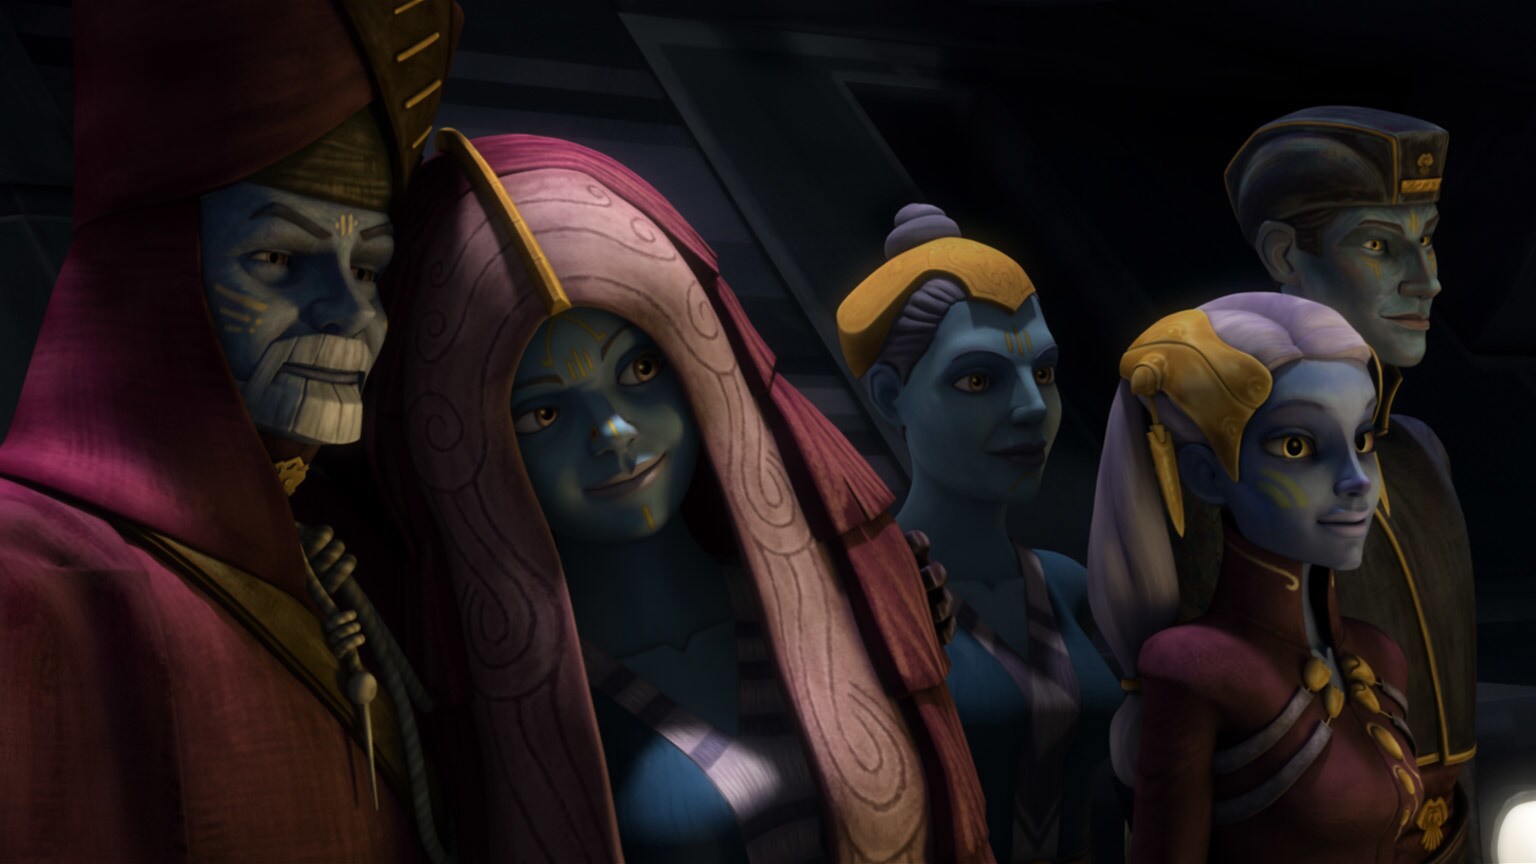 The Clone Wars Rewatch: Lost Hope in the "Sphere of Influence"